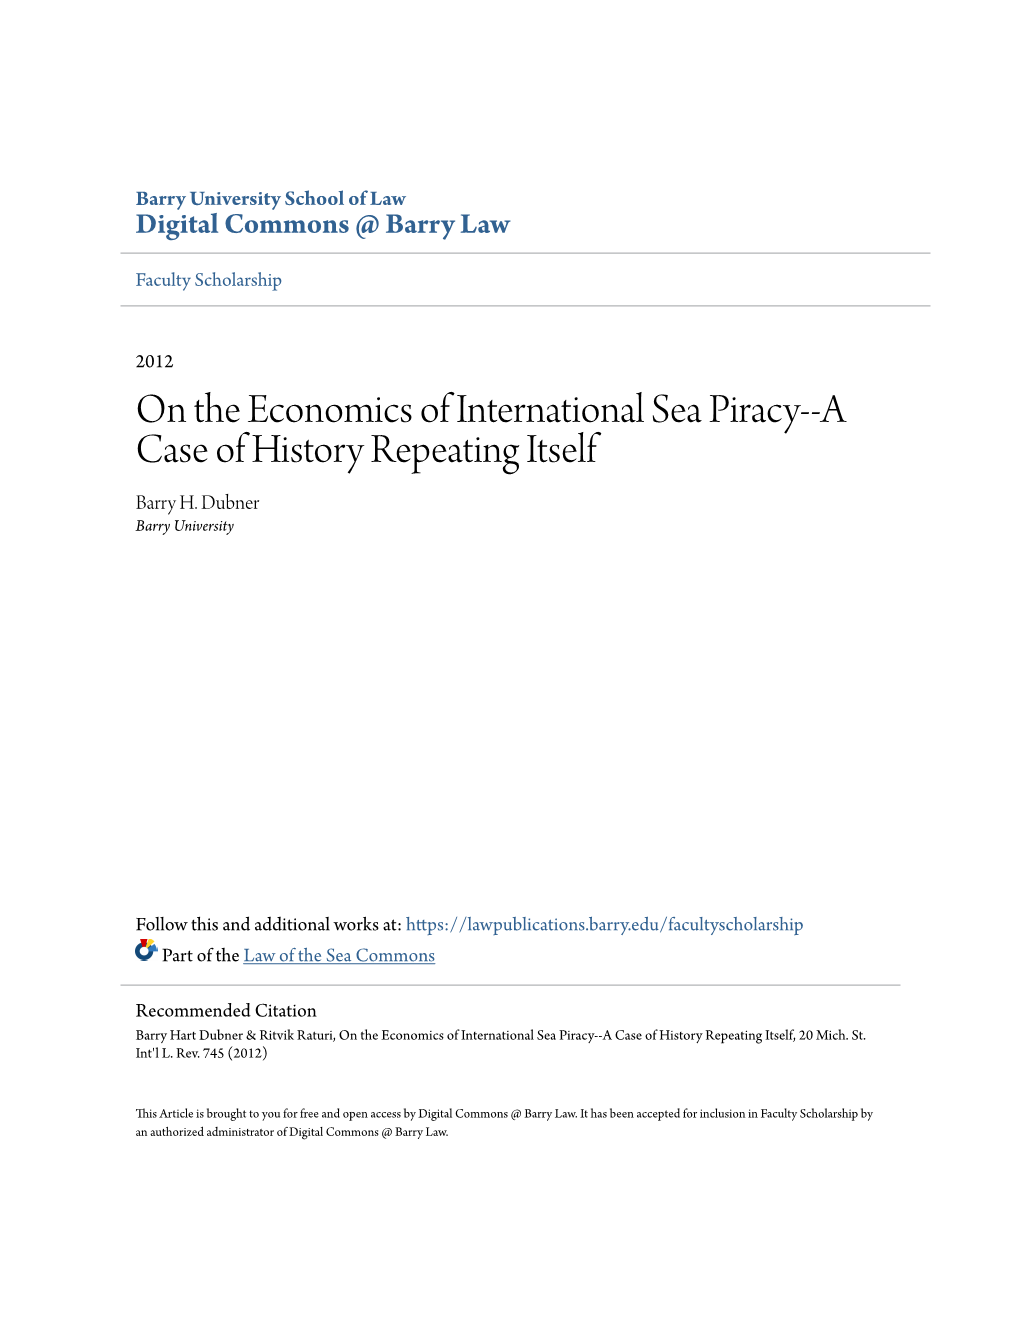 On the Economics of International Sea Piracy--A Case of History Repeating Itself Barry H